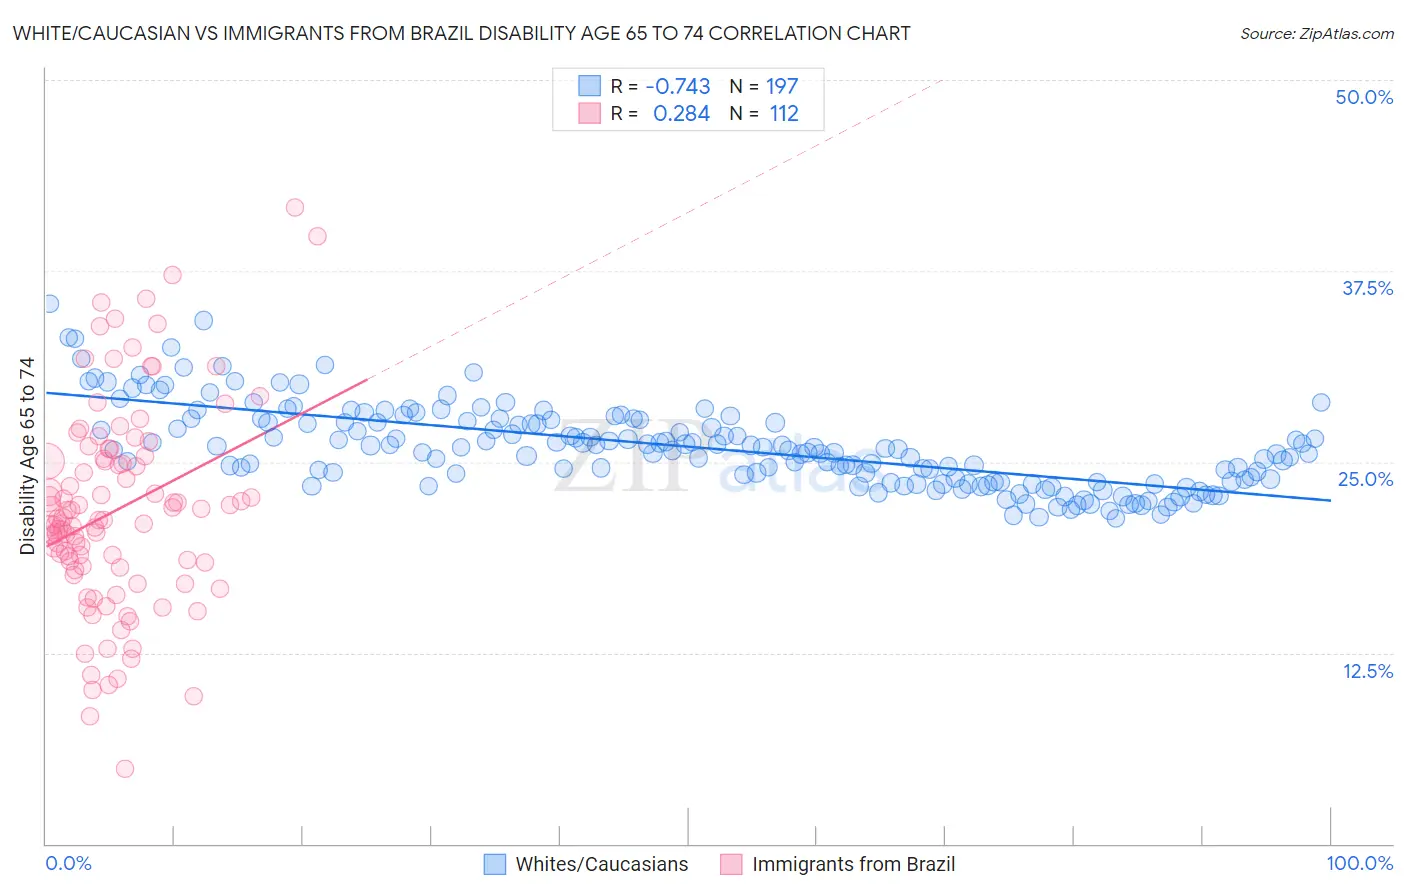 White/Caucasian vs Immigrants from Brazil Disability Age 65 to 74